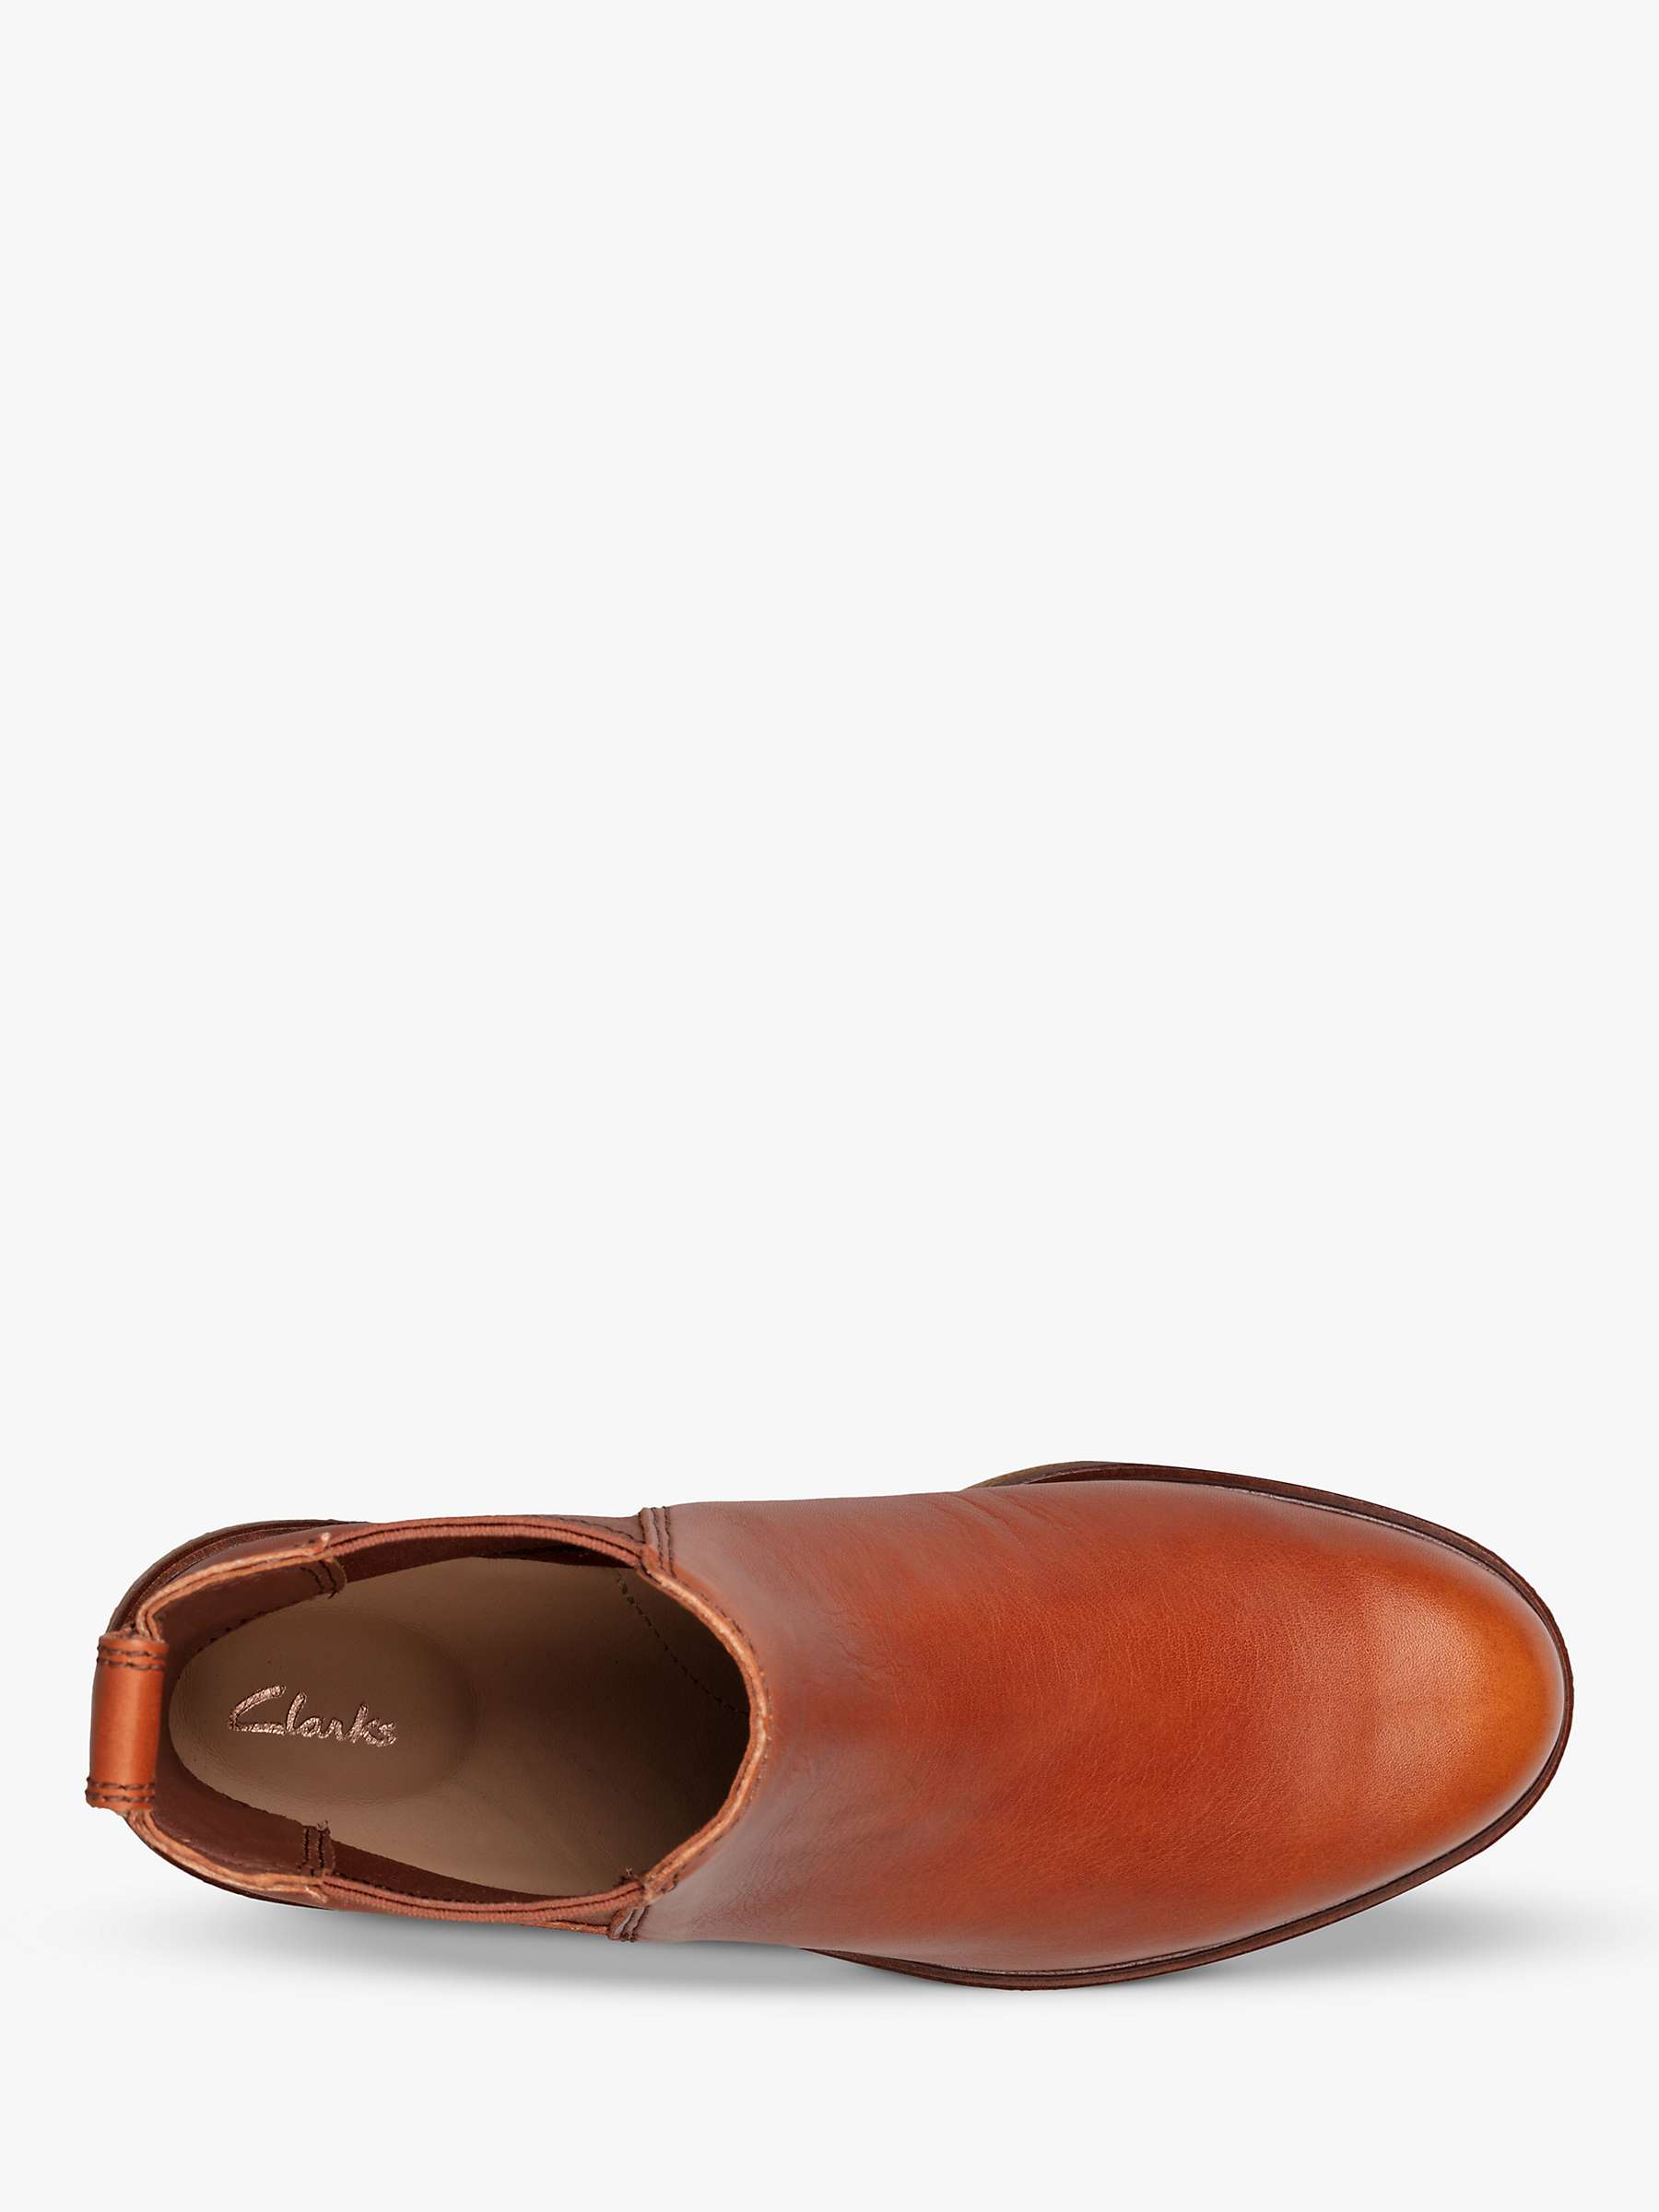 Buy Clarks Clarkdale Arlo Wide Fit Leather Chelsea Boots Online at johnlewis.com